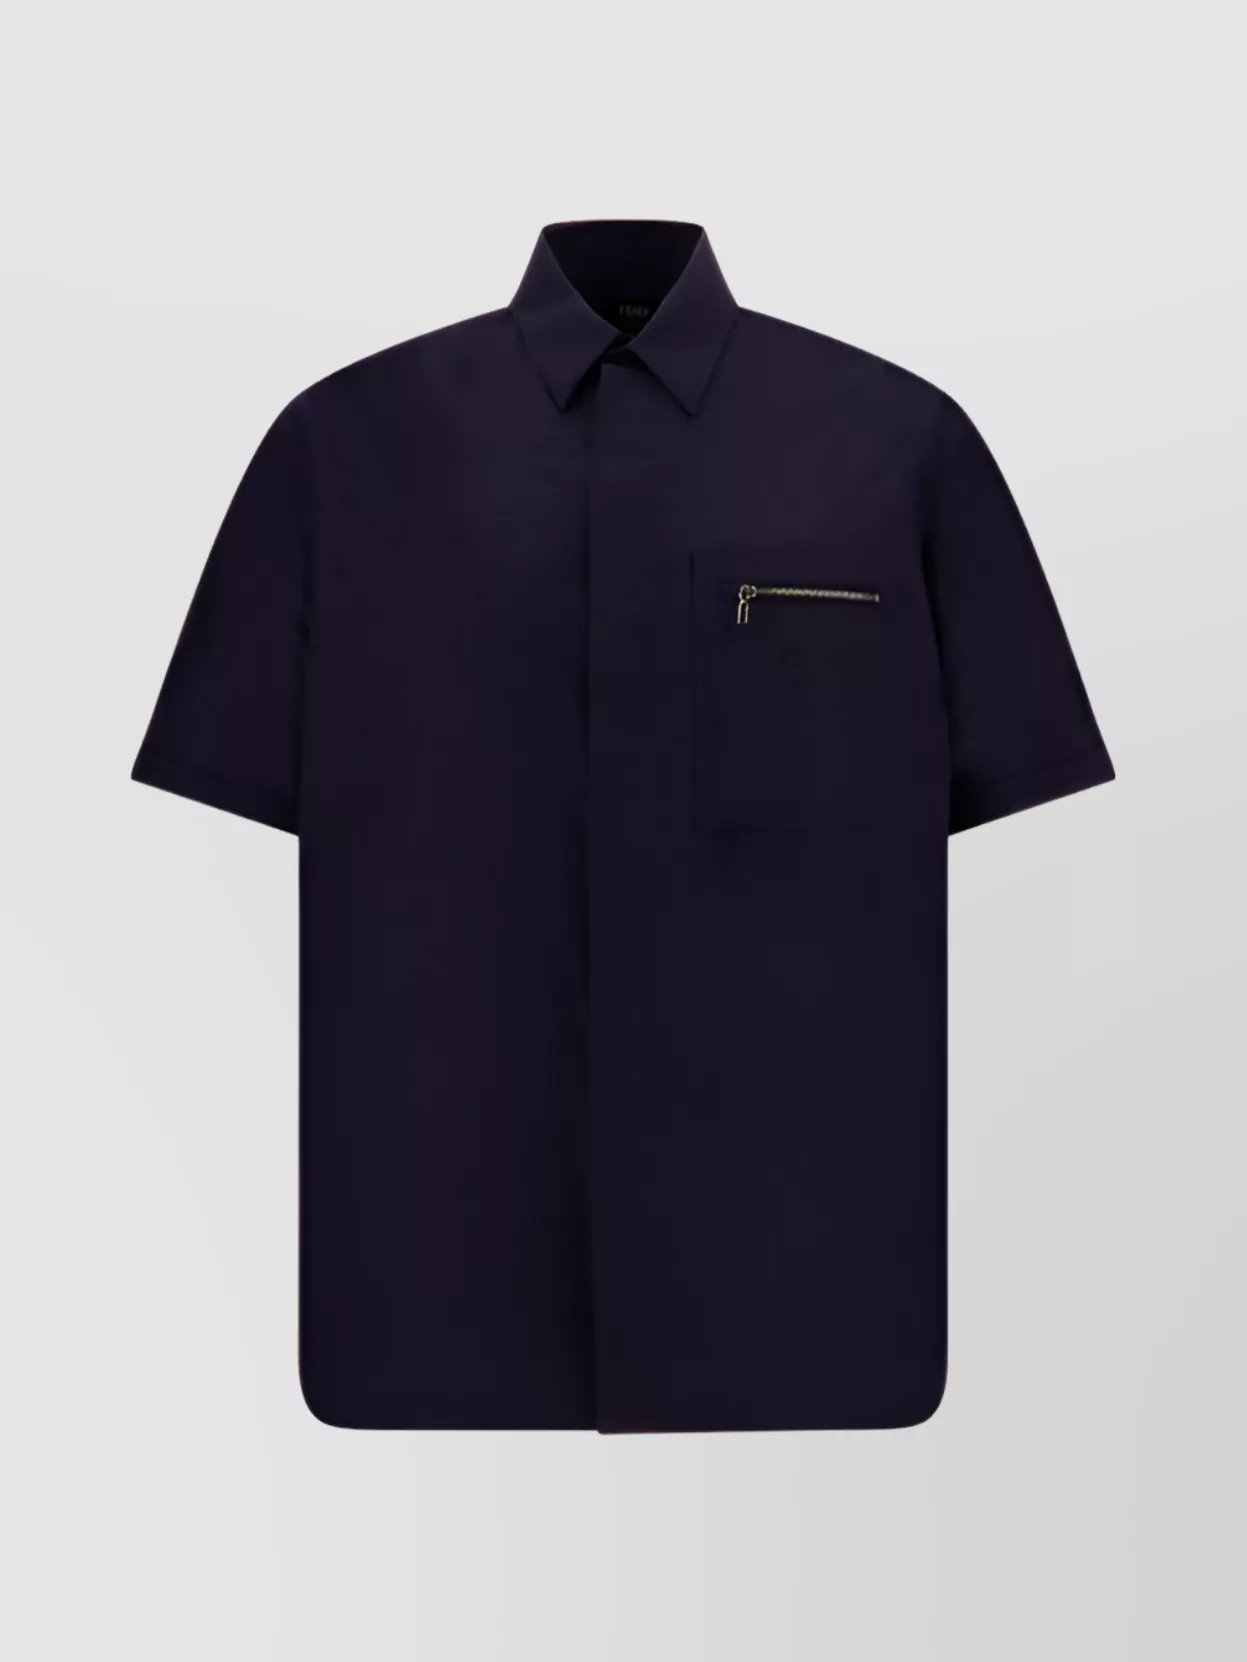 Fendi Collared Shirt With Front Zipper Pocket In Black